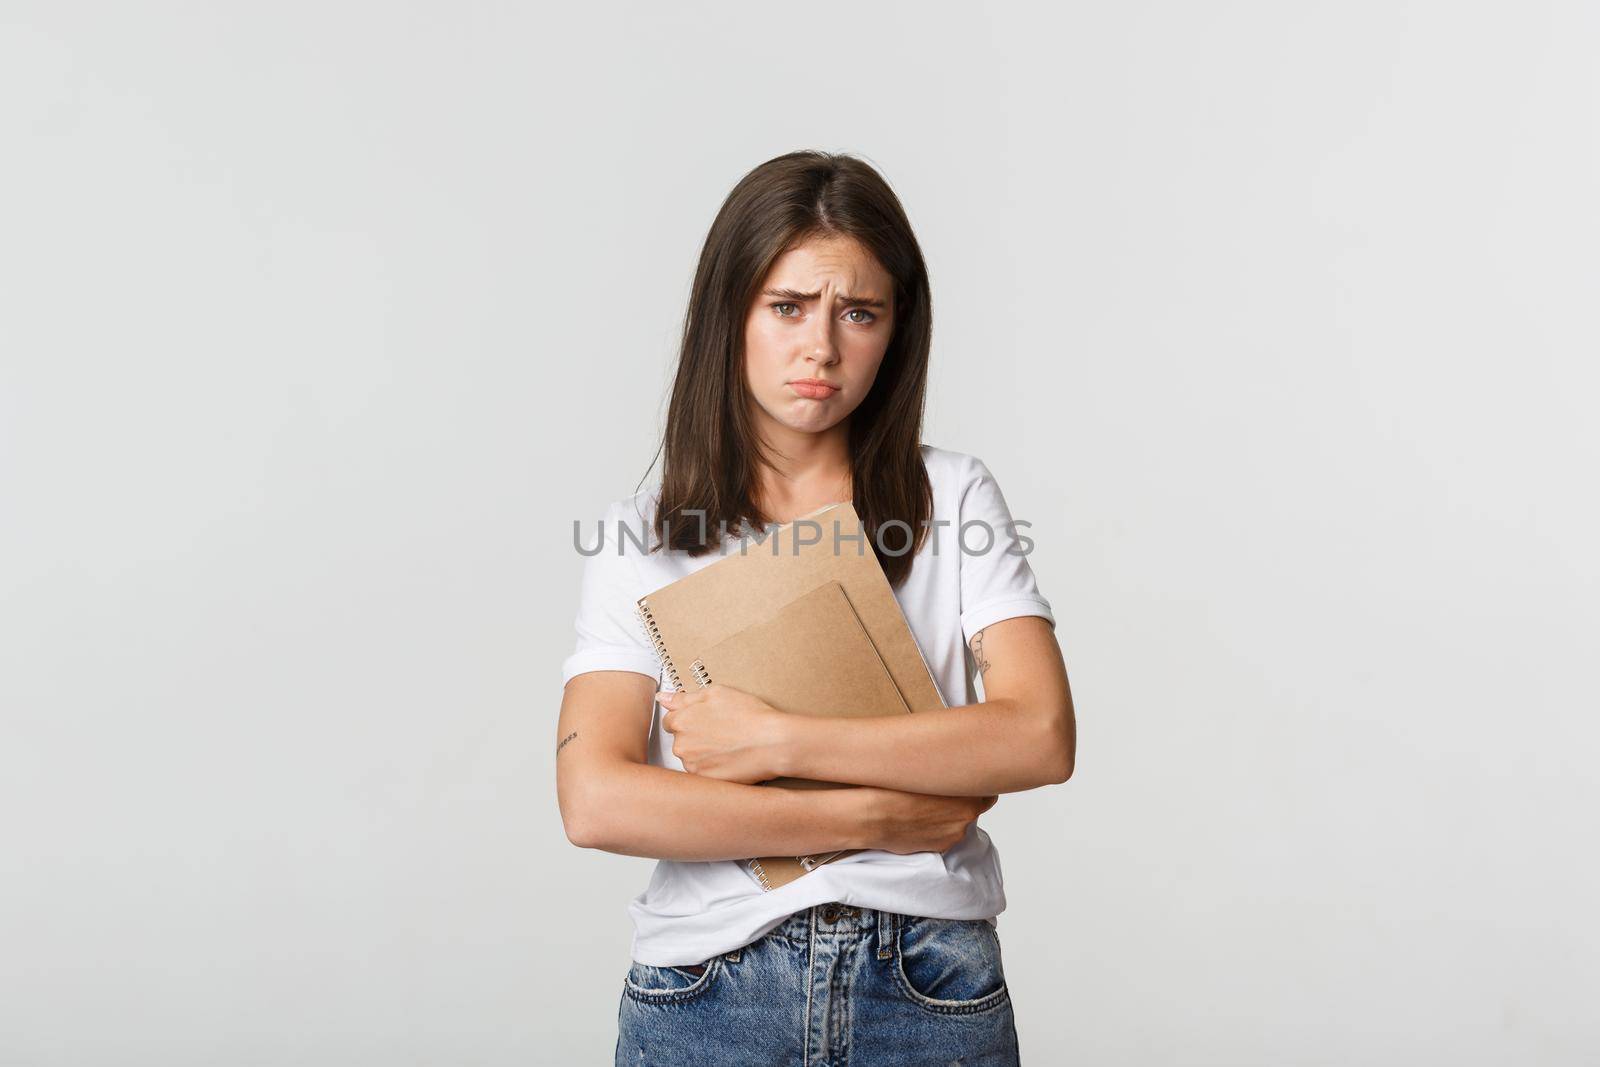 Portrait of gloomy and miserable cute girl with notebooks, frowning and looking sad at camera.